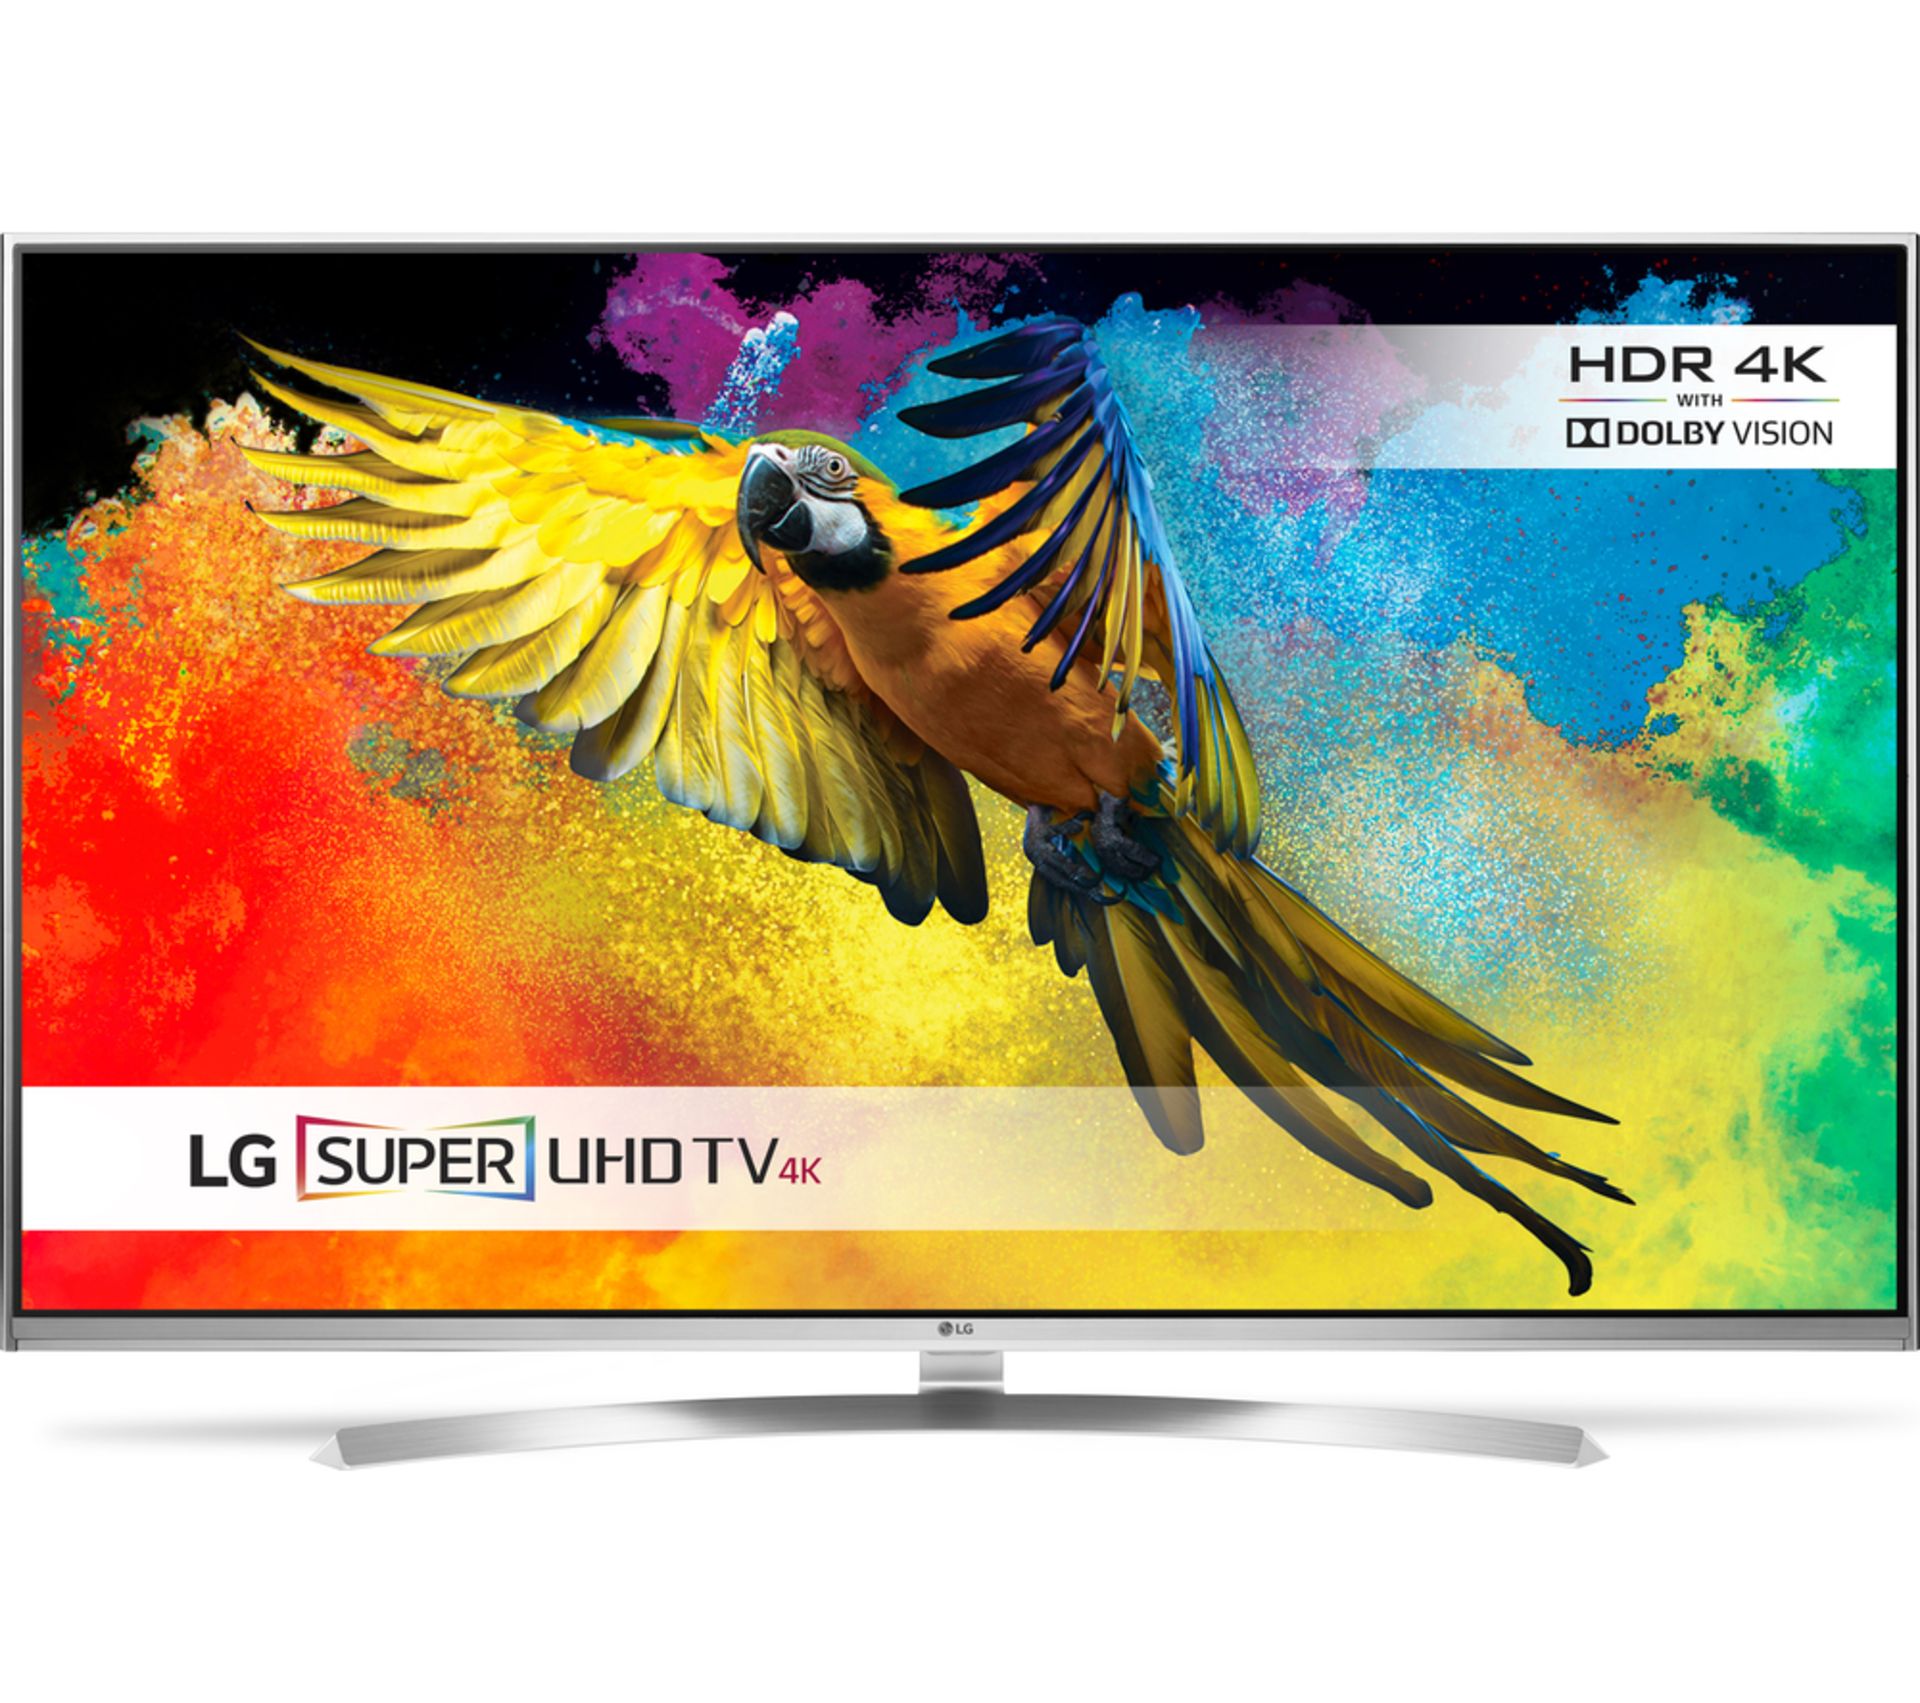 LG 43UH668V Smart 4k Ultra HD HDR 43" LED TV. RRP £699. 4k Ultra HD picture is up to 4 times the - Image 4 of 4